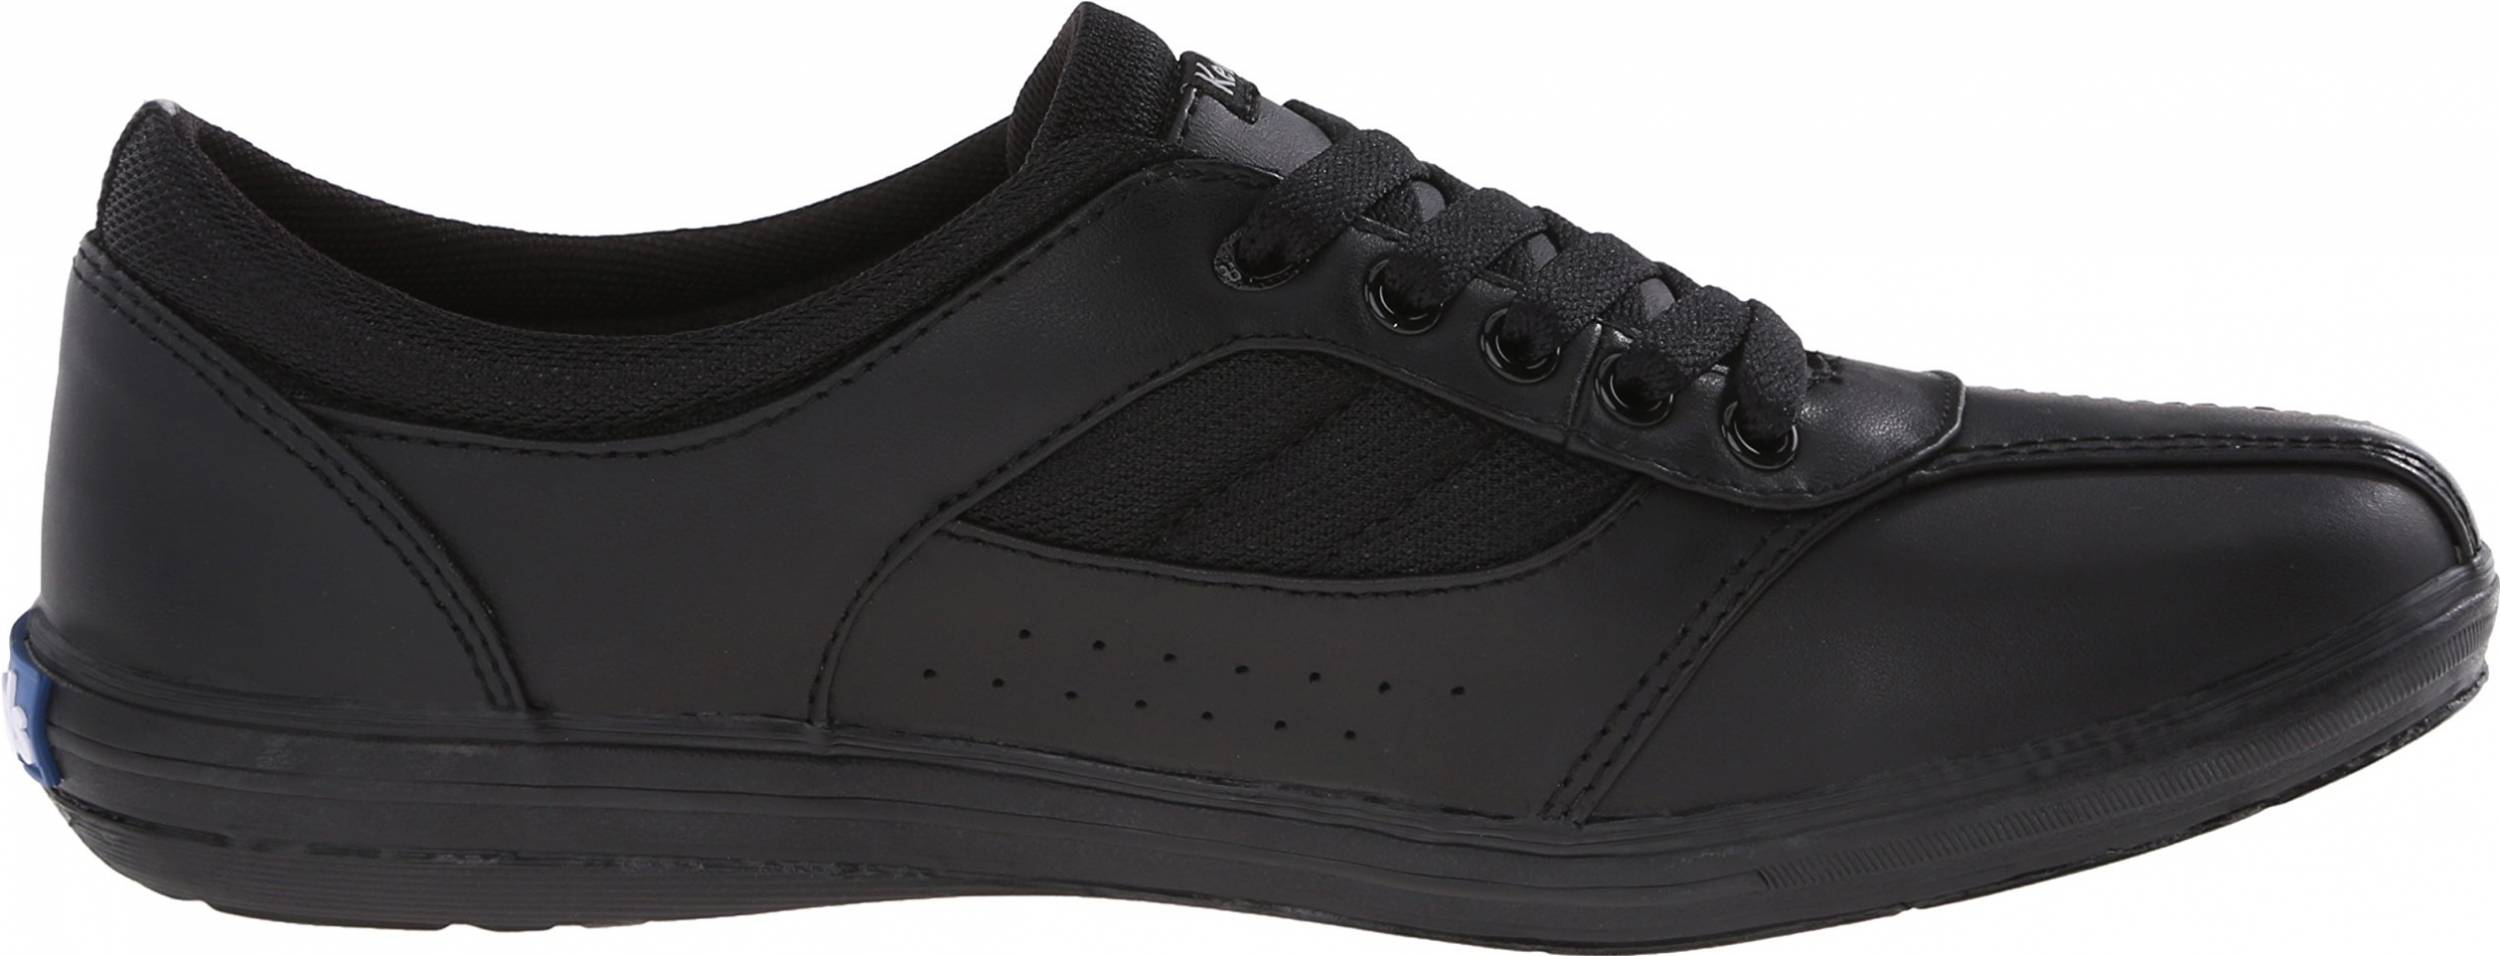 Only $40 + Review of Keds Prestige 